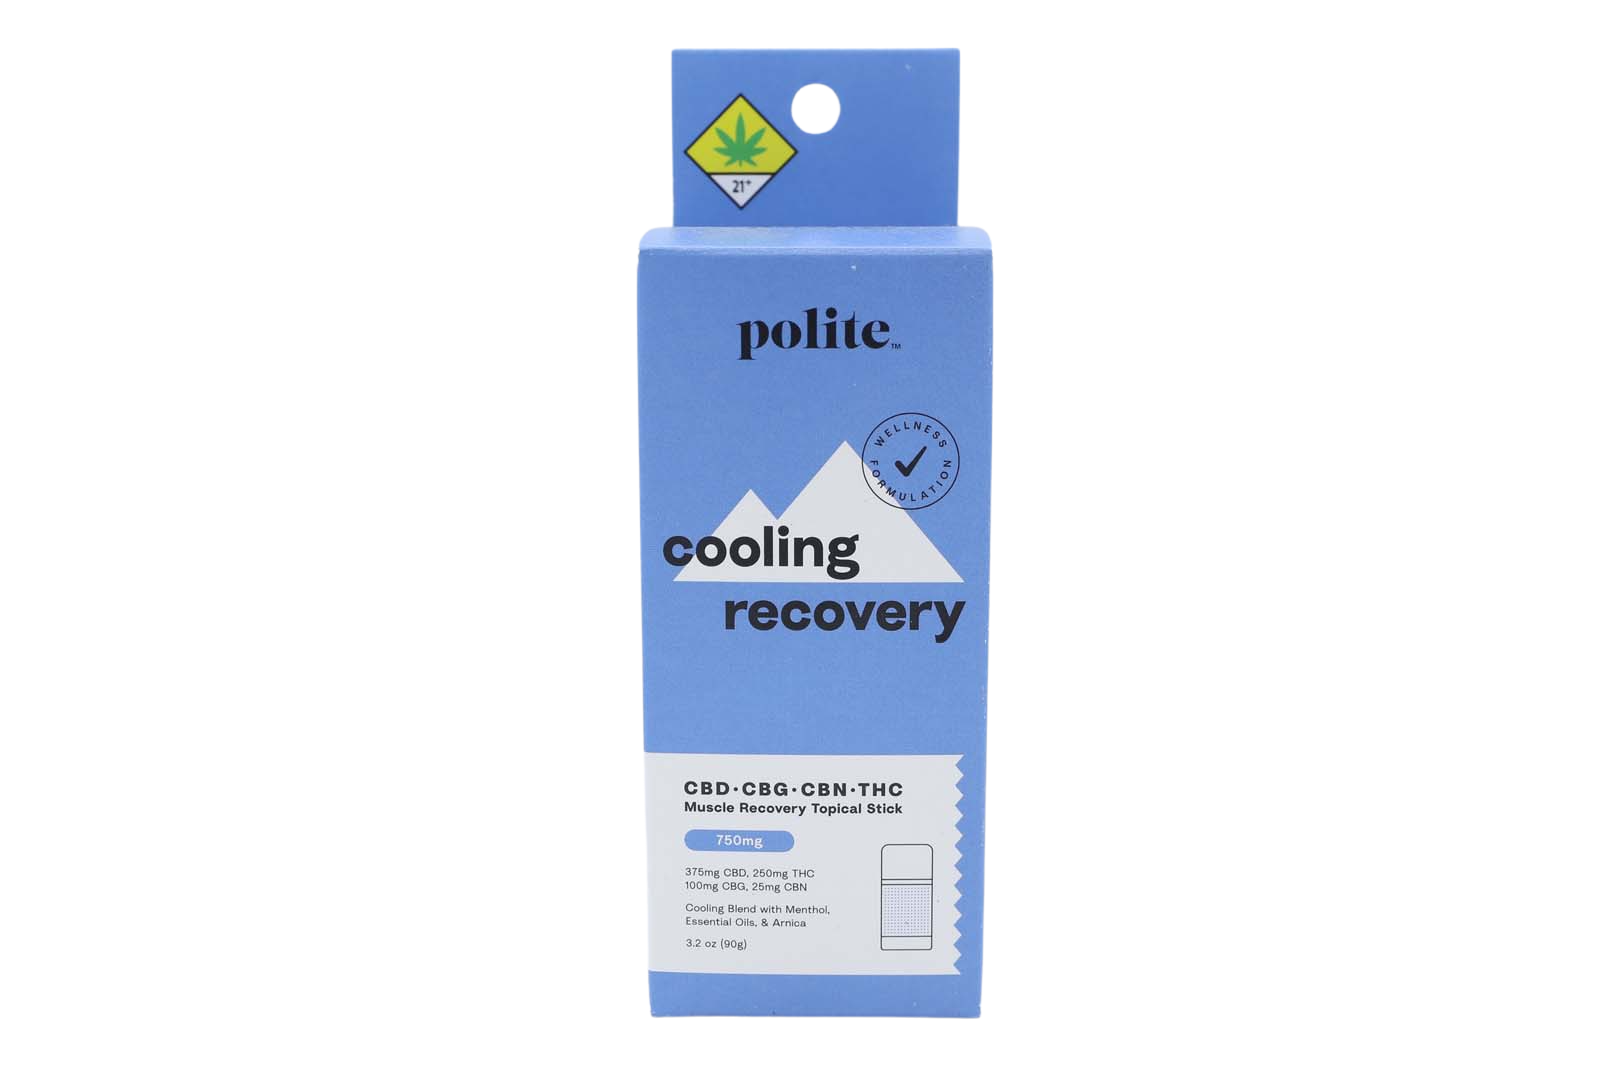 Polite Cooling Recovery